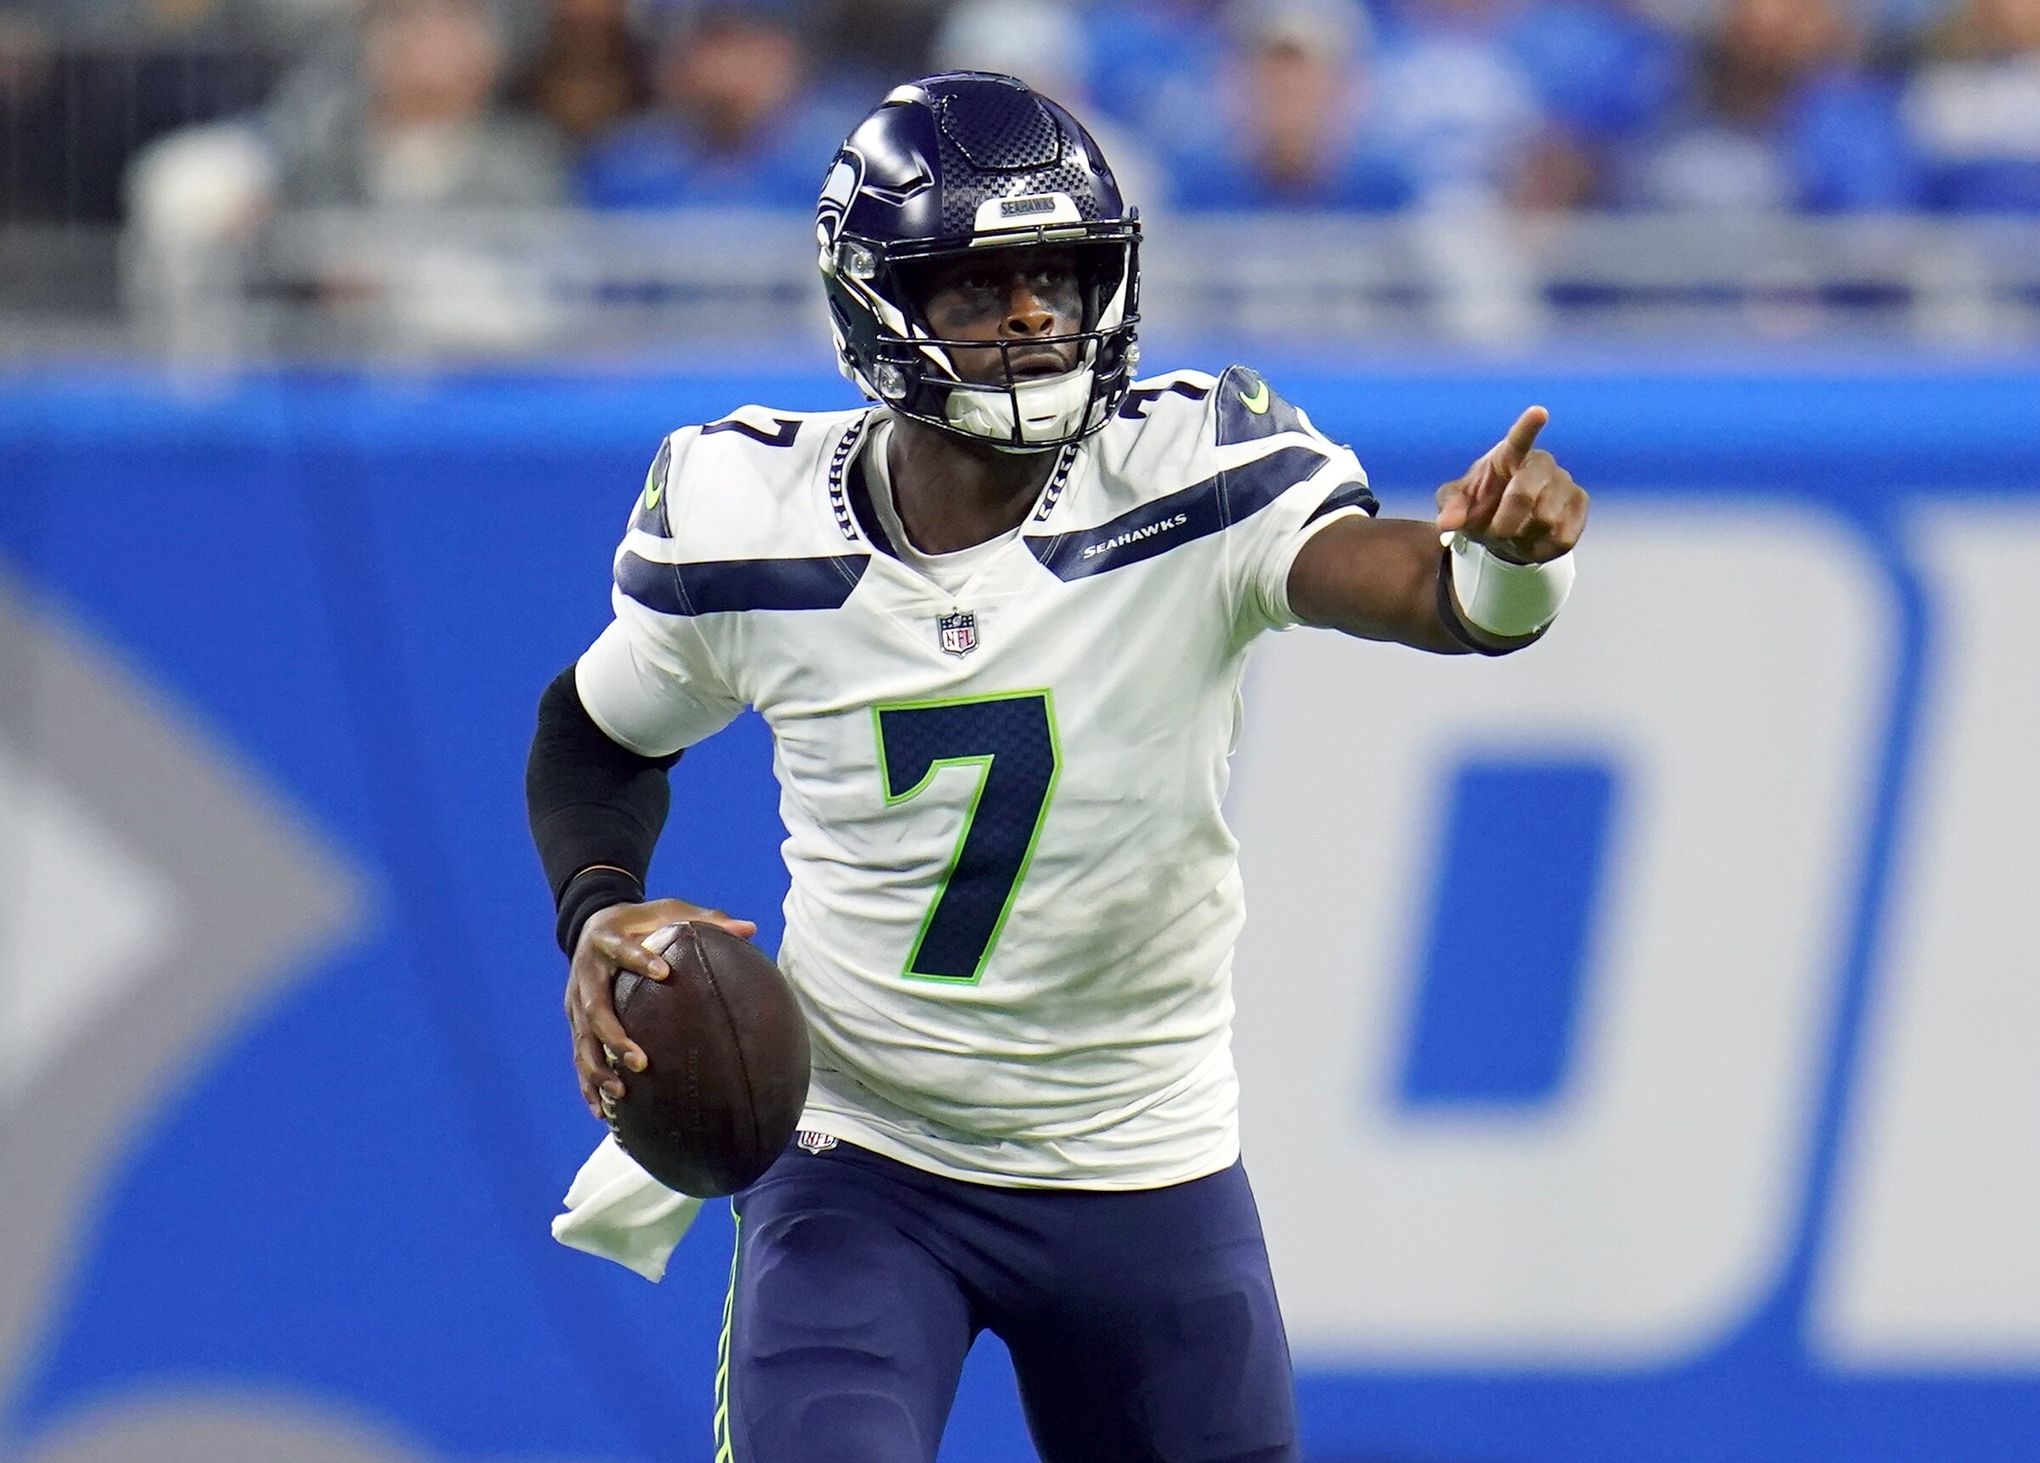 Russell Wilson Week 4 Preview vs. the Bears